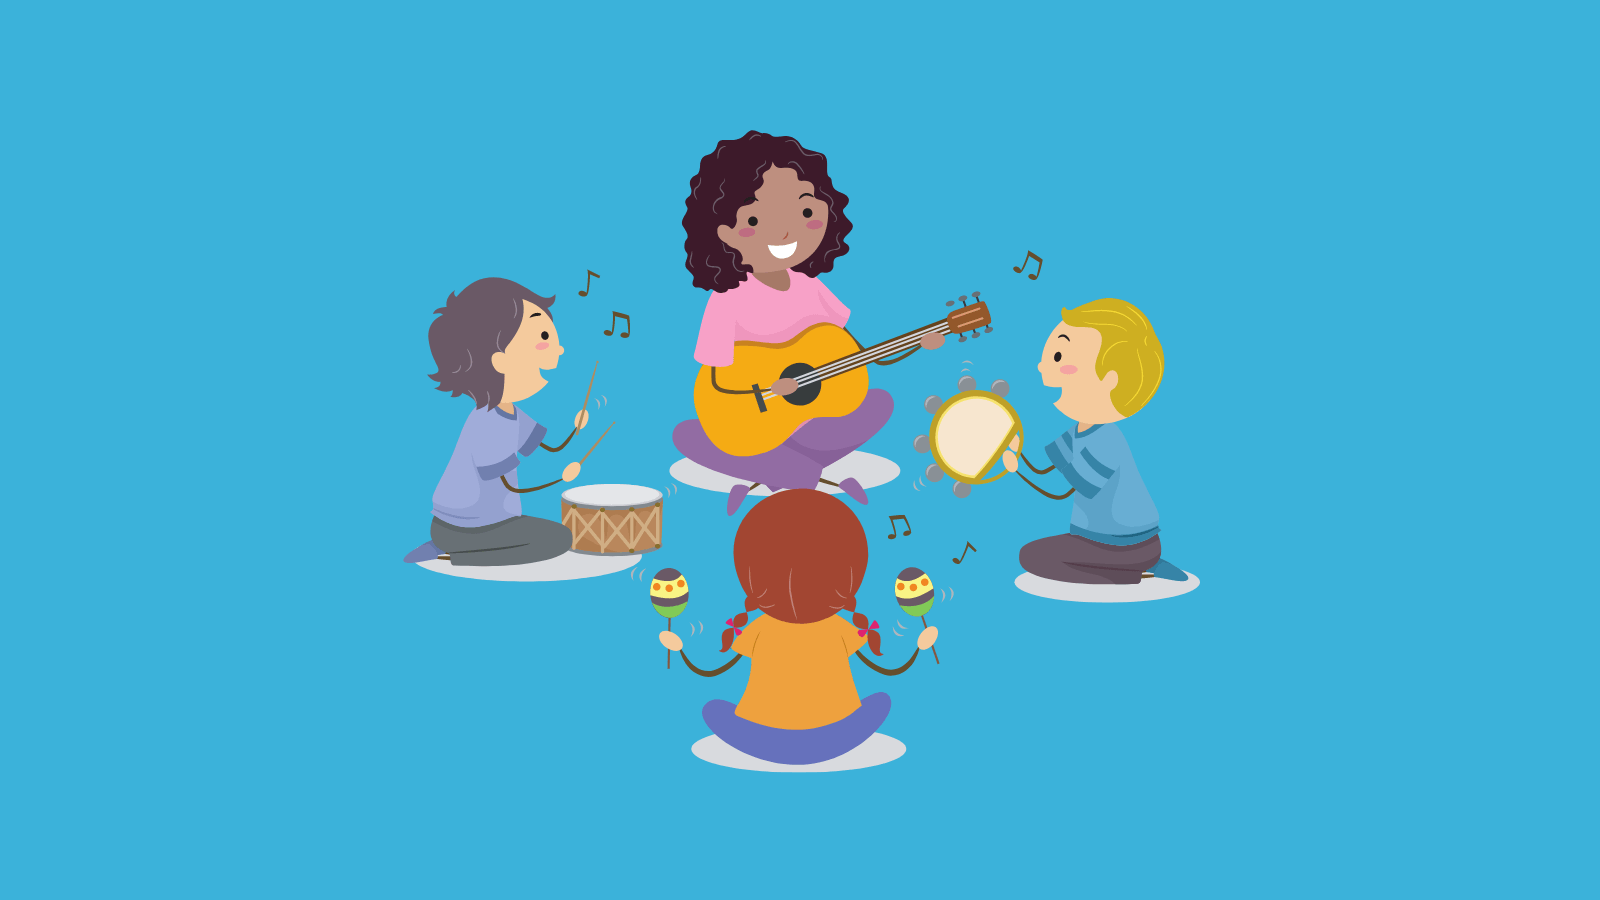 A woman playing guitar surrounded by three young children playing tambourine, maracas, and a drum